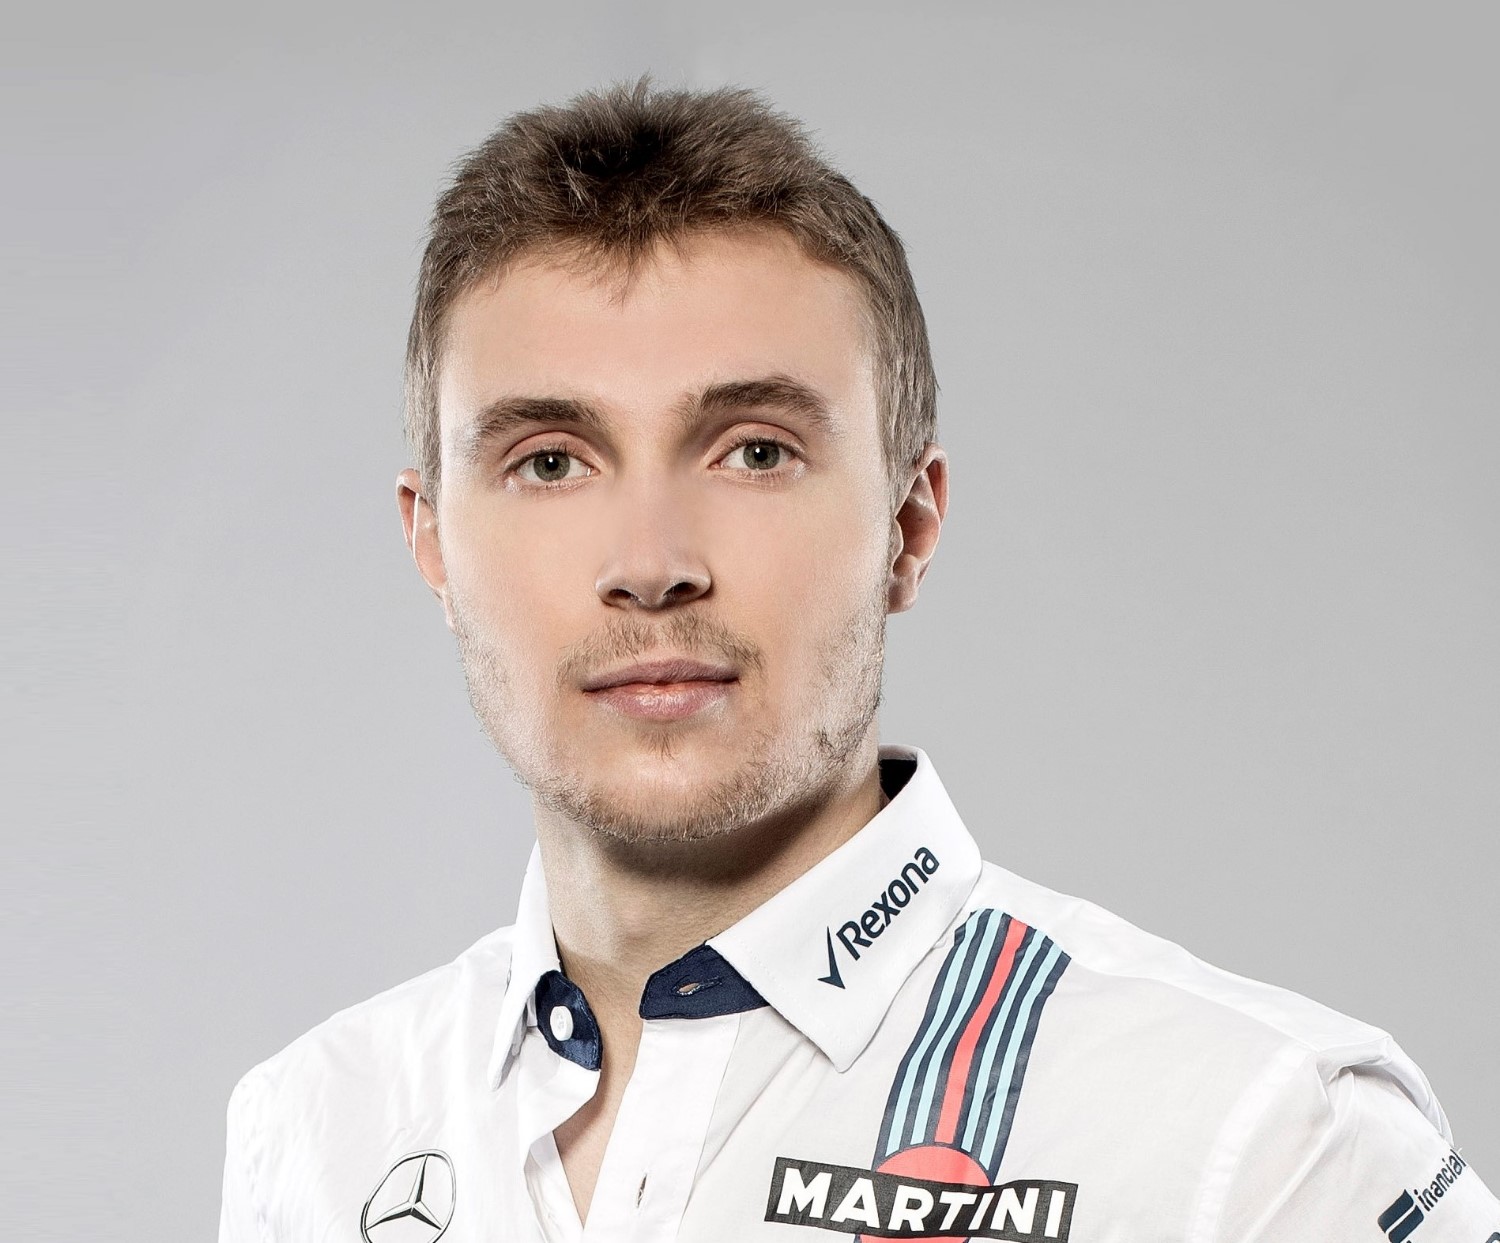 Sergey Sirotkin - if he has a huge check, he will drive